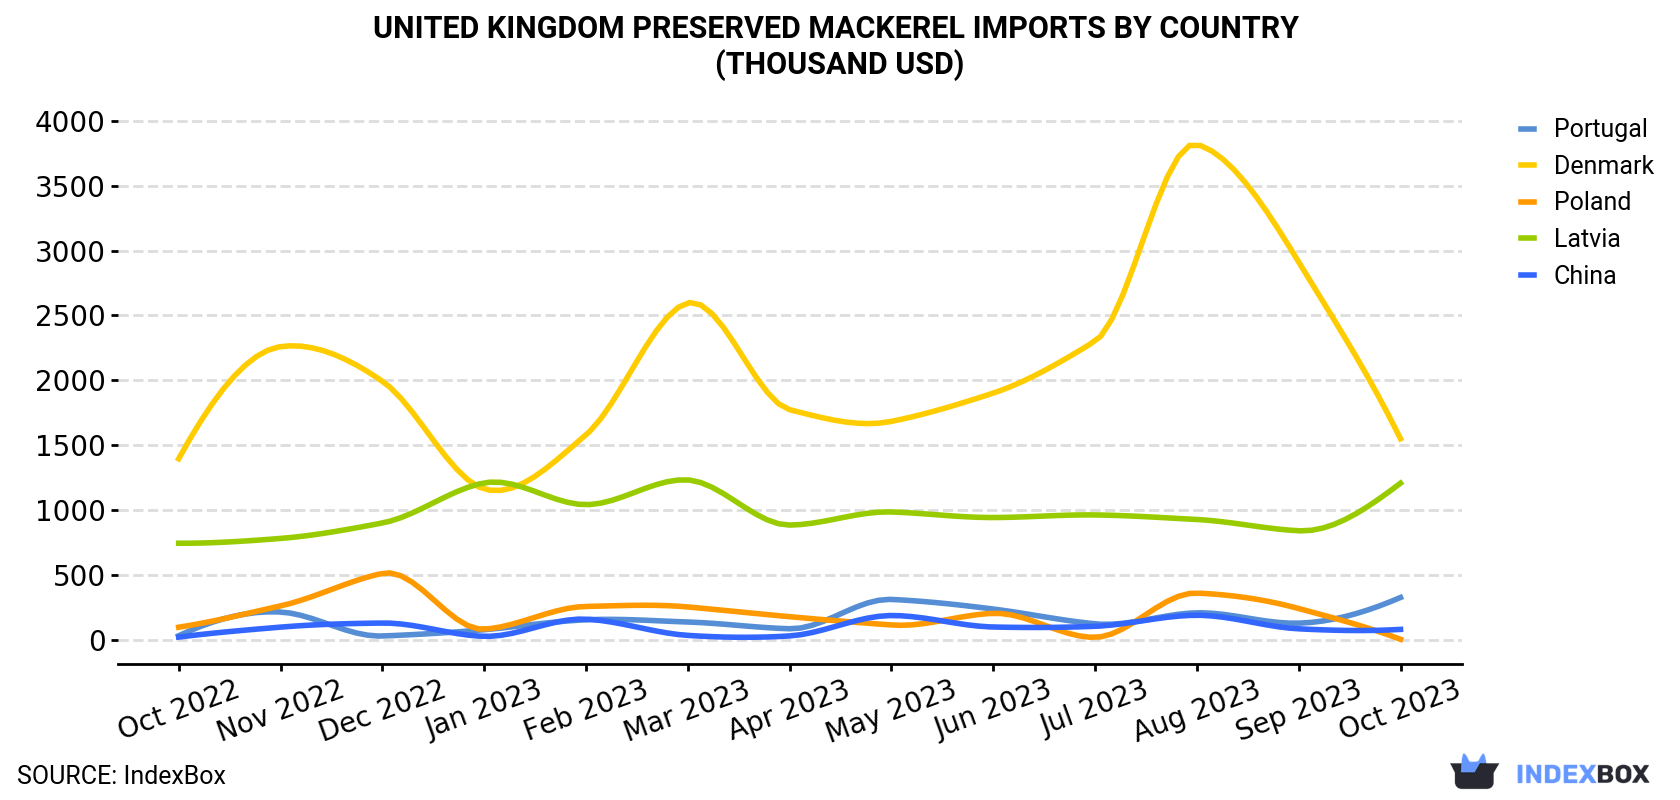 United Kingdom Preserved Mackerel Imports By Country (Thousand USD)